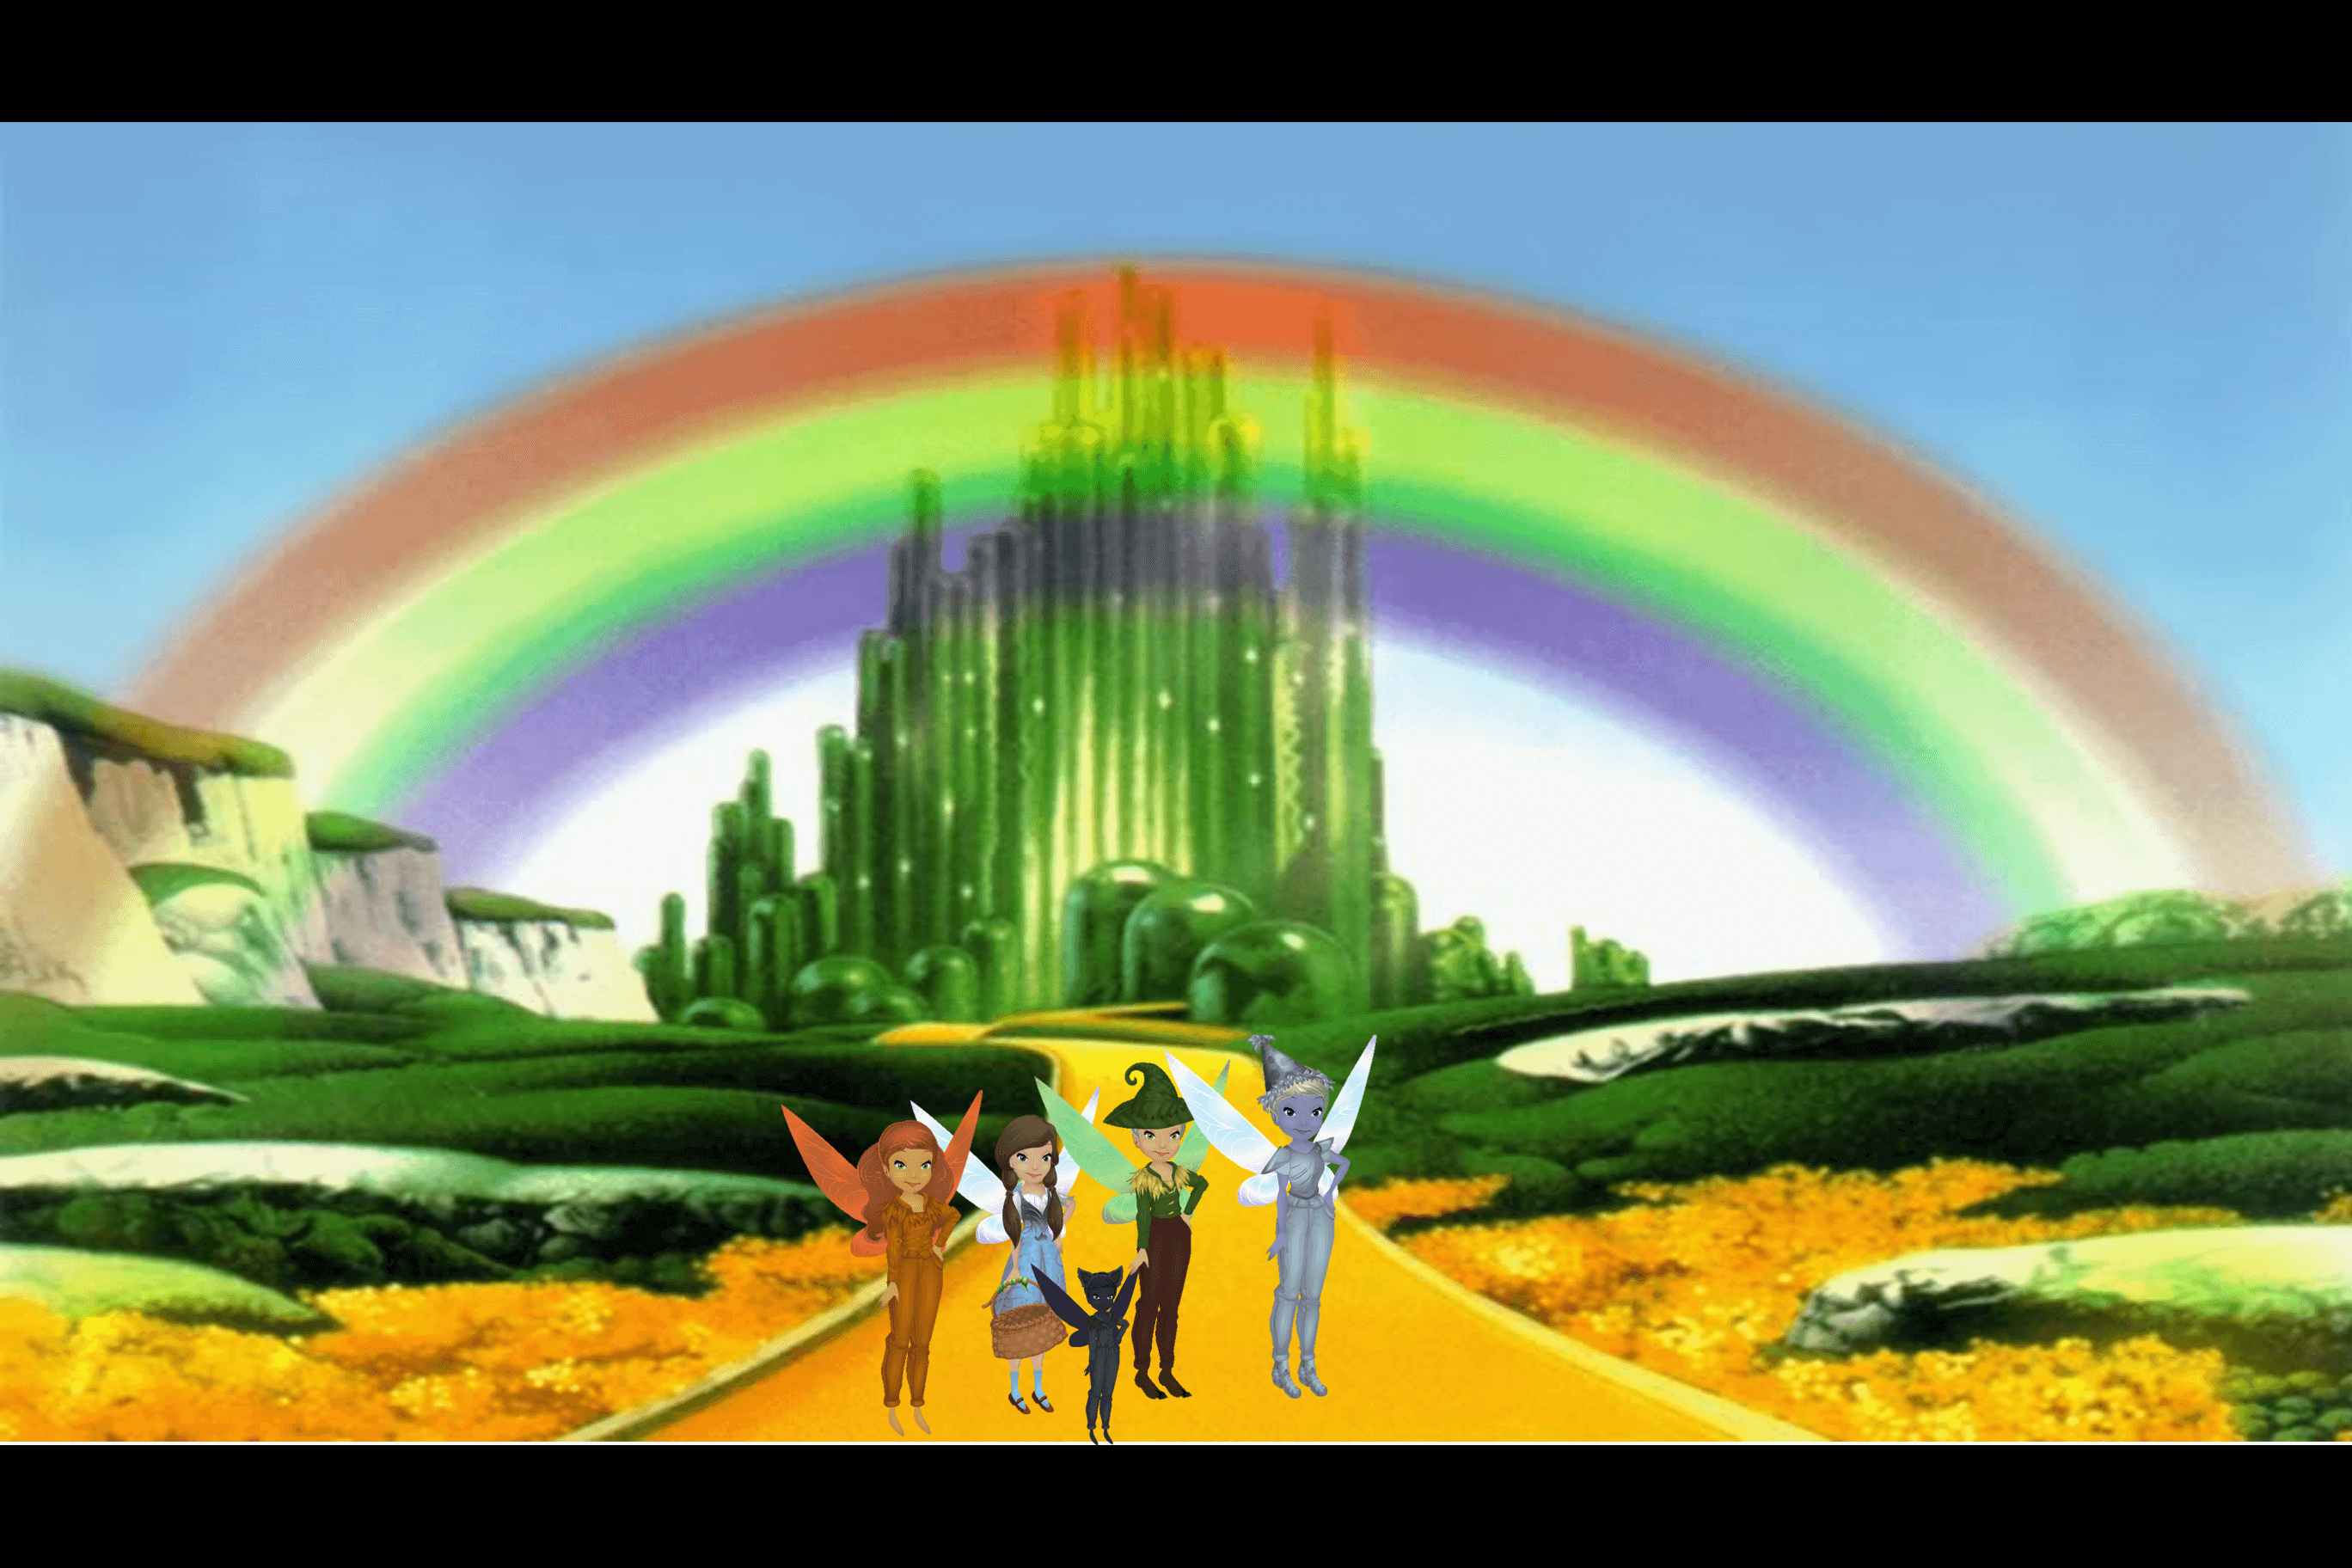 We're off to see the wizard